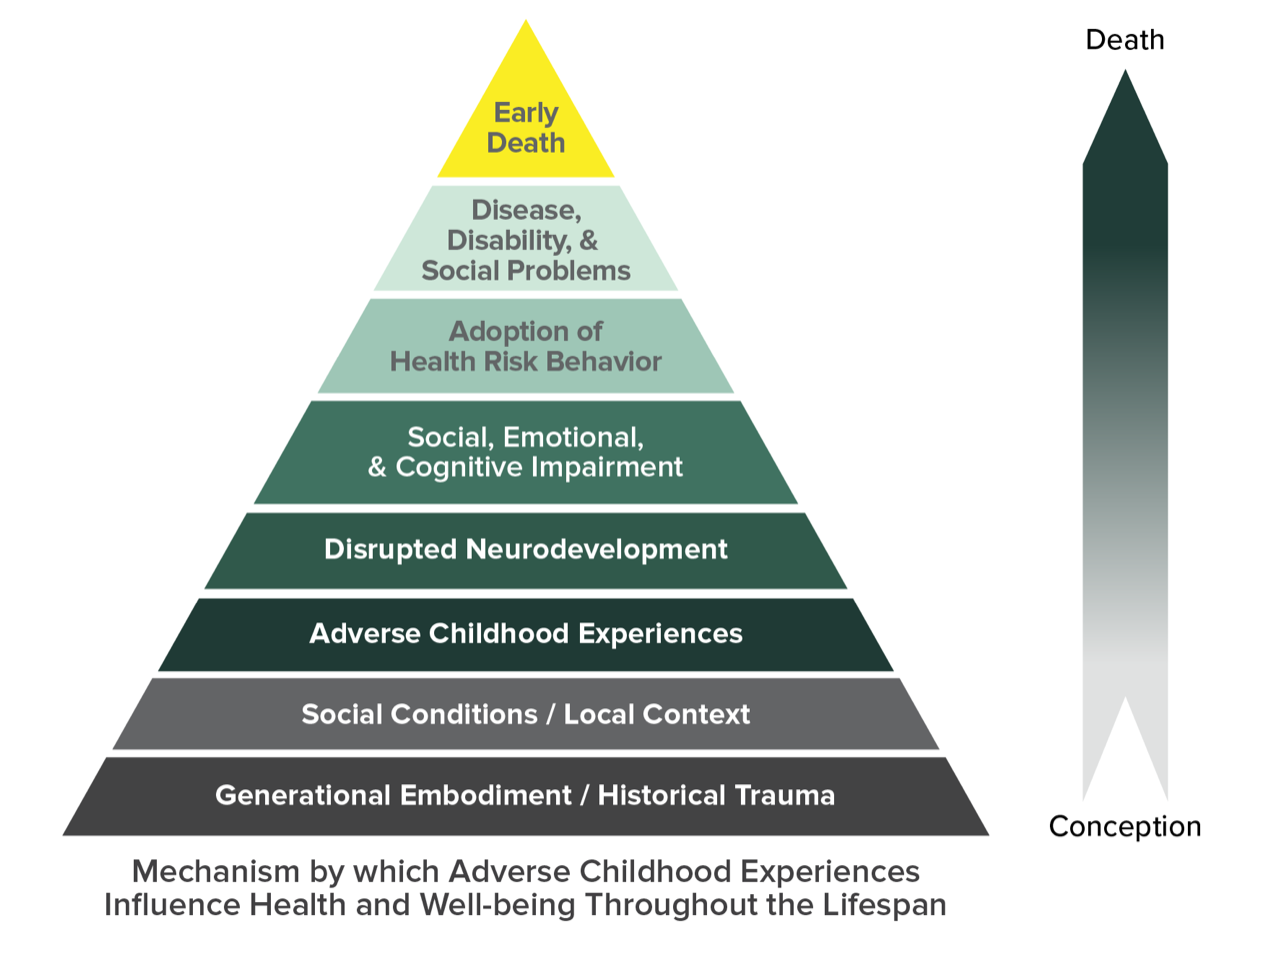 Pyramid showing how ACEs influences health and well-being